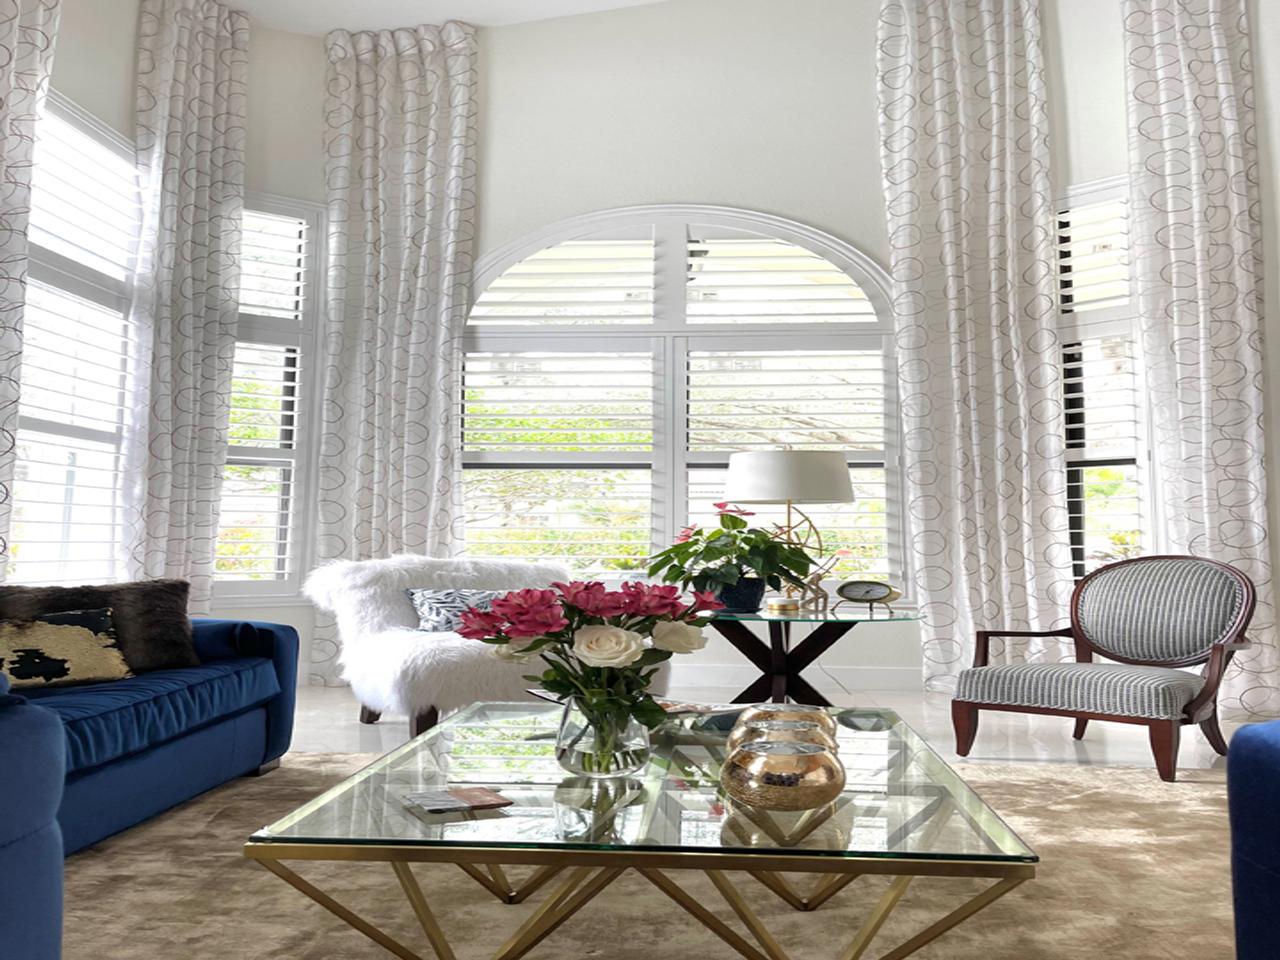 Arched windows with shutters in a living room